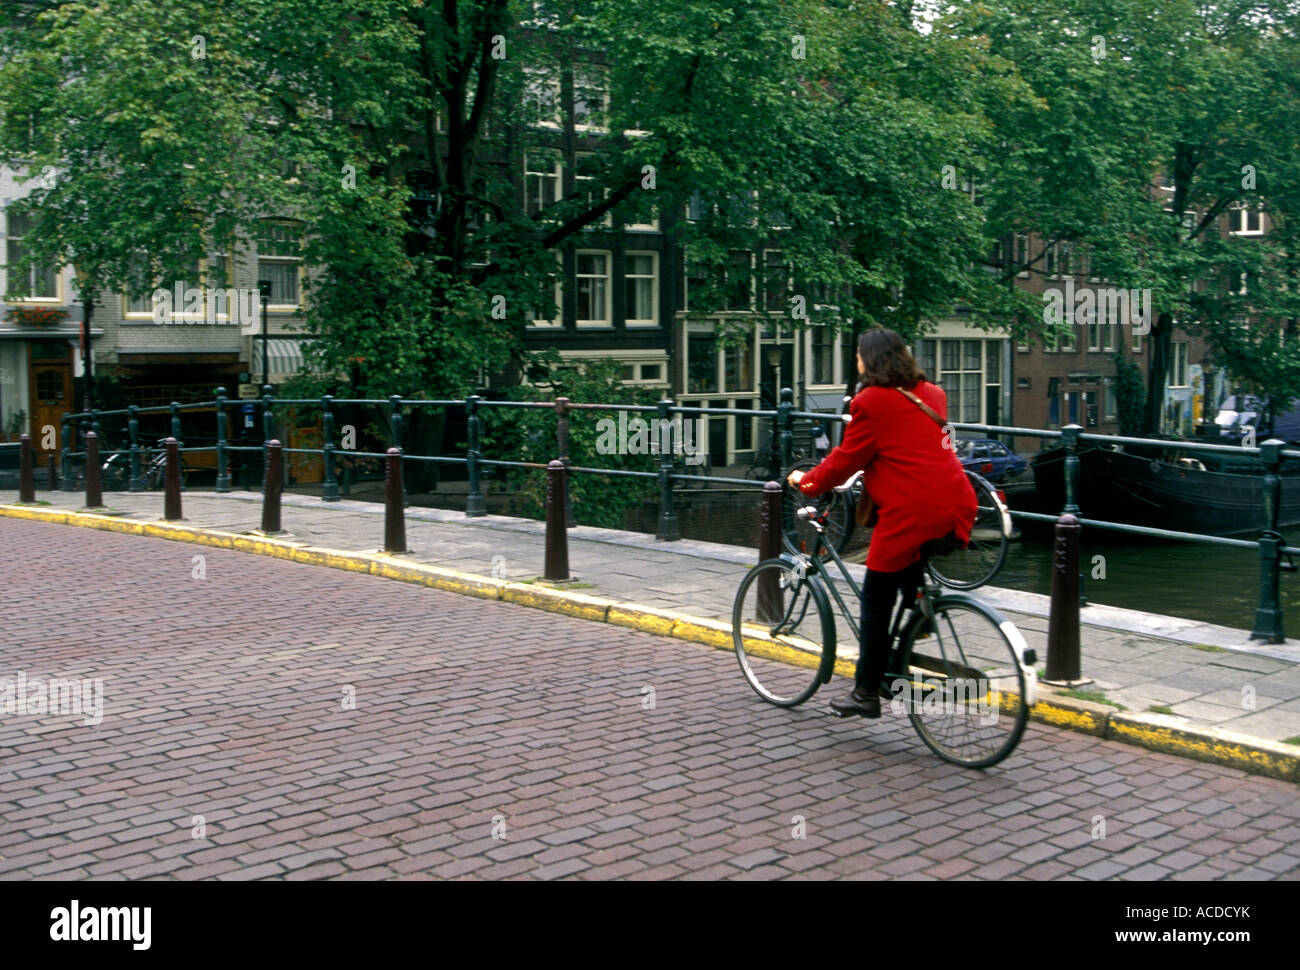 1, on,e Dutch woman, bicyclist, riding bicycle, Prinsengracht, Amsterdam, Holland, Netherlands, Europe Stock Photo